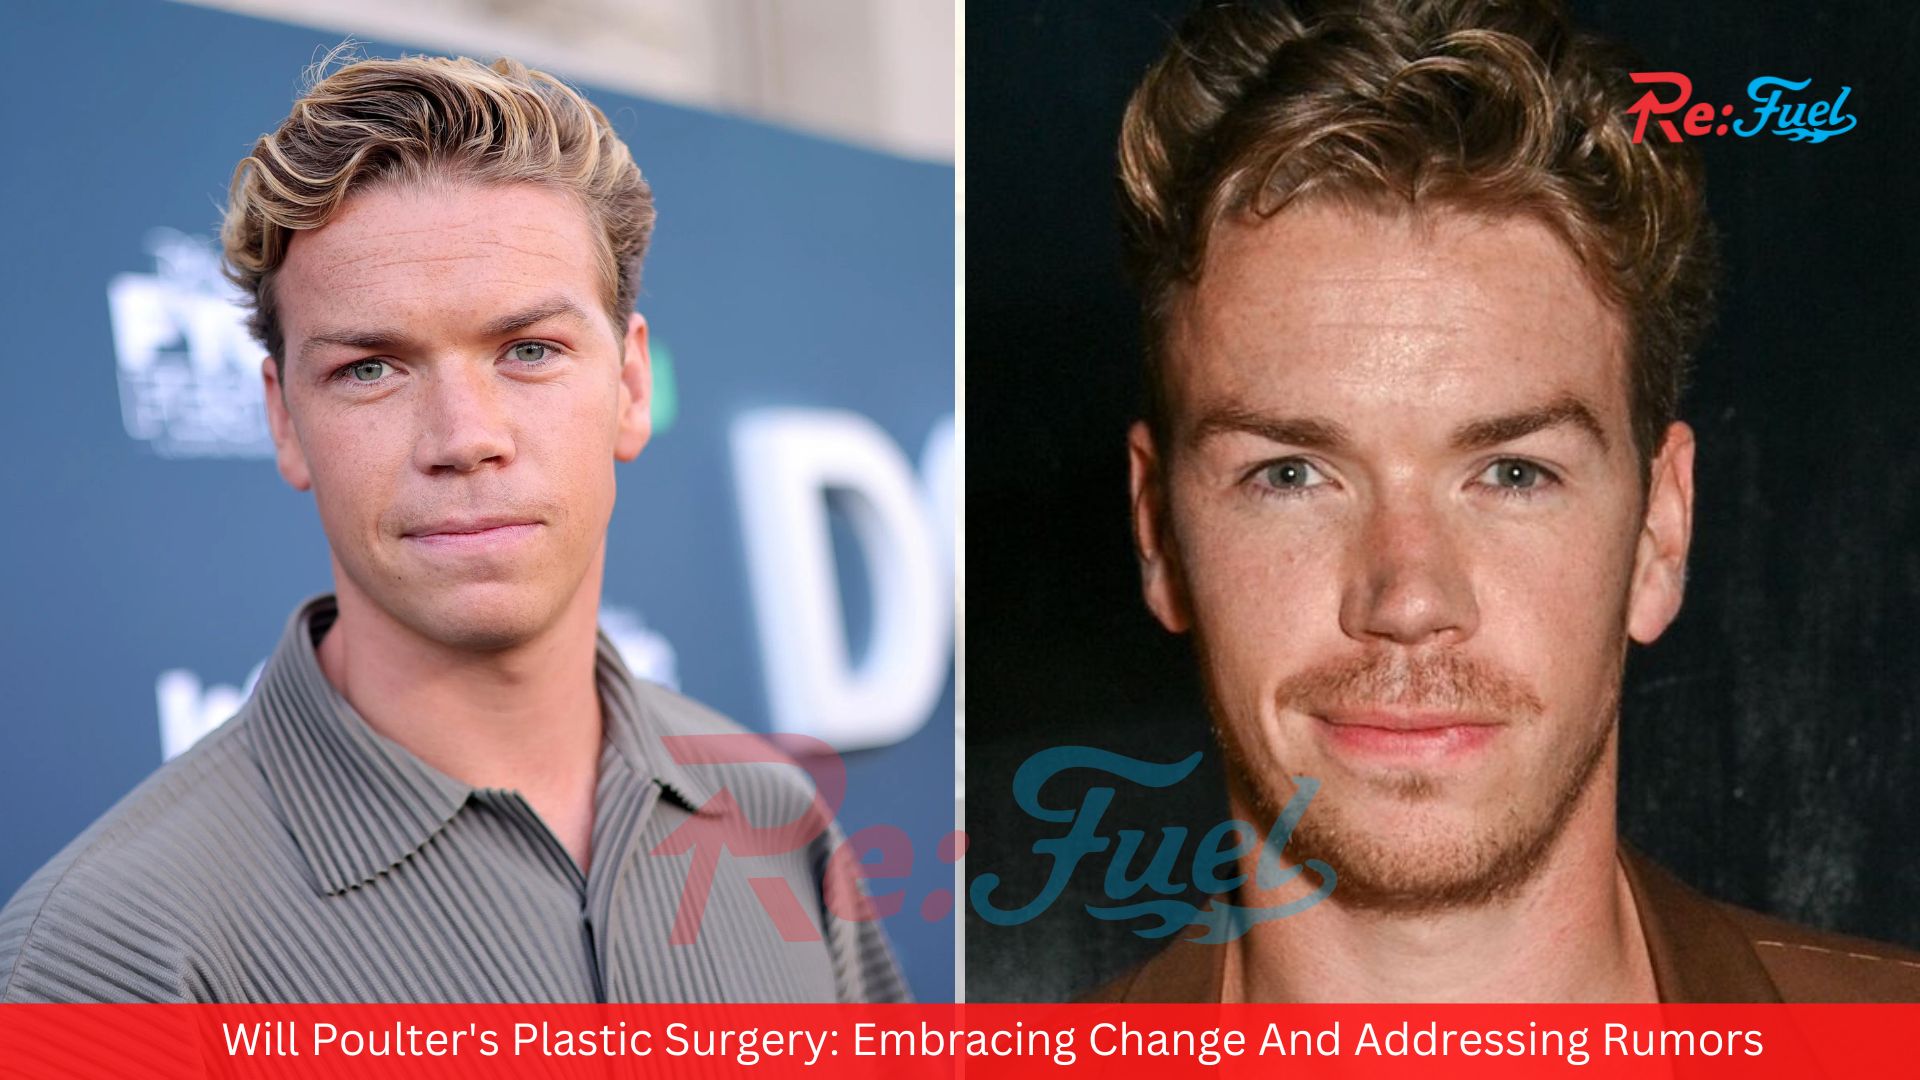 Will Poulter's Plastic Surgery: Embracing Change And Addressing Rumors